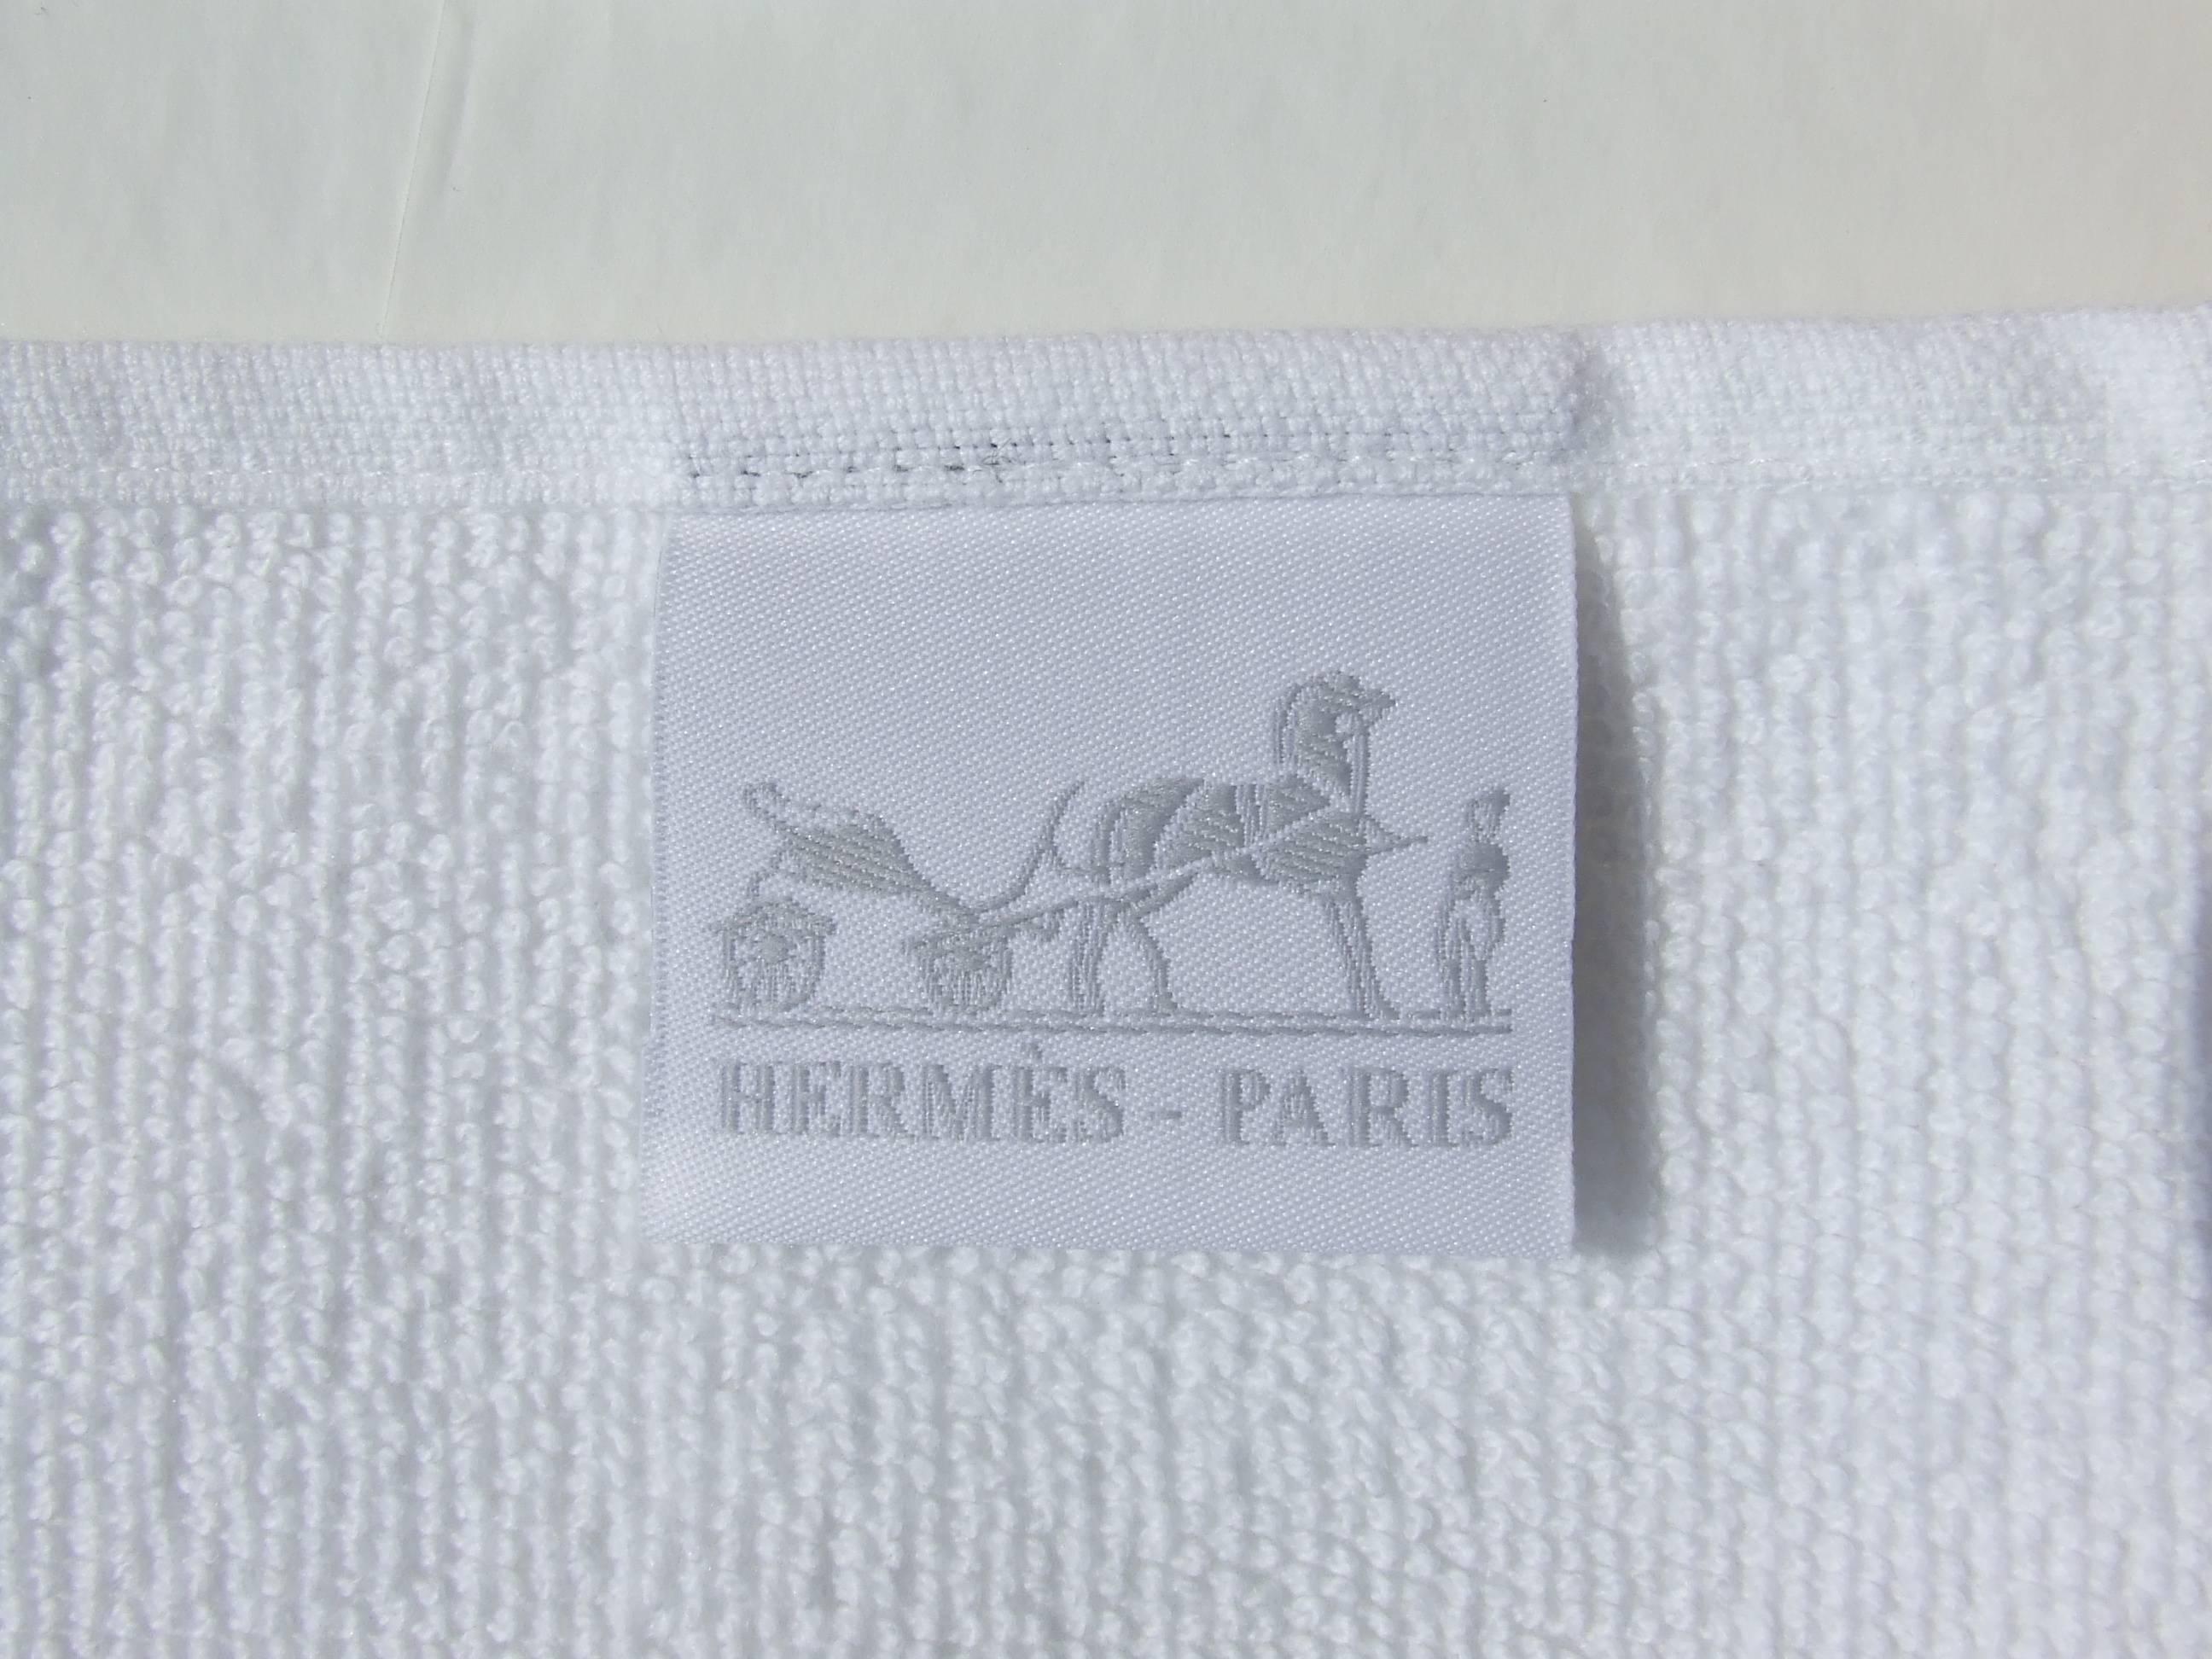 Hermès Towel and Sweatband Sports Set Tennis in Combed Cotton 1